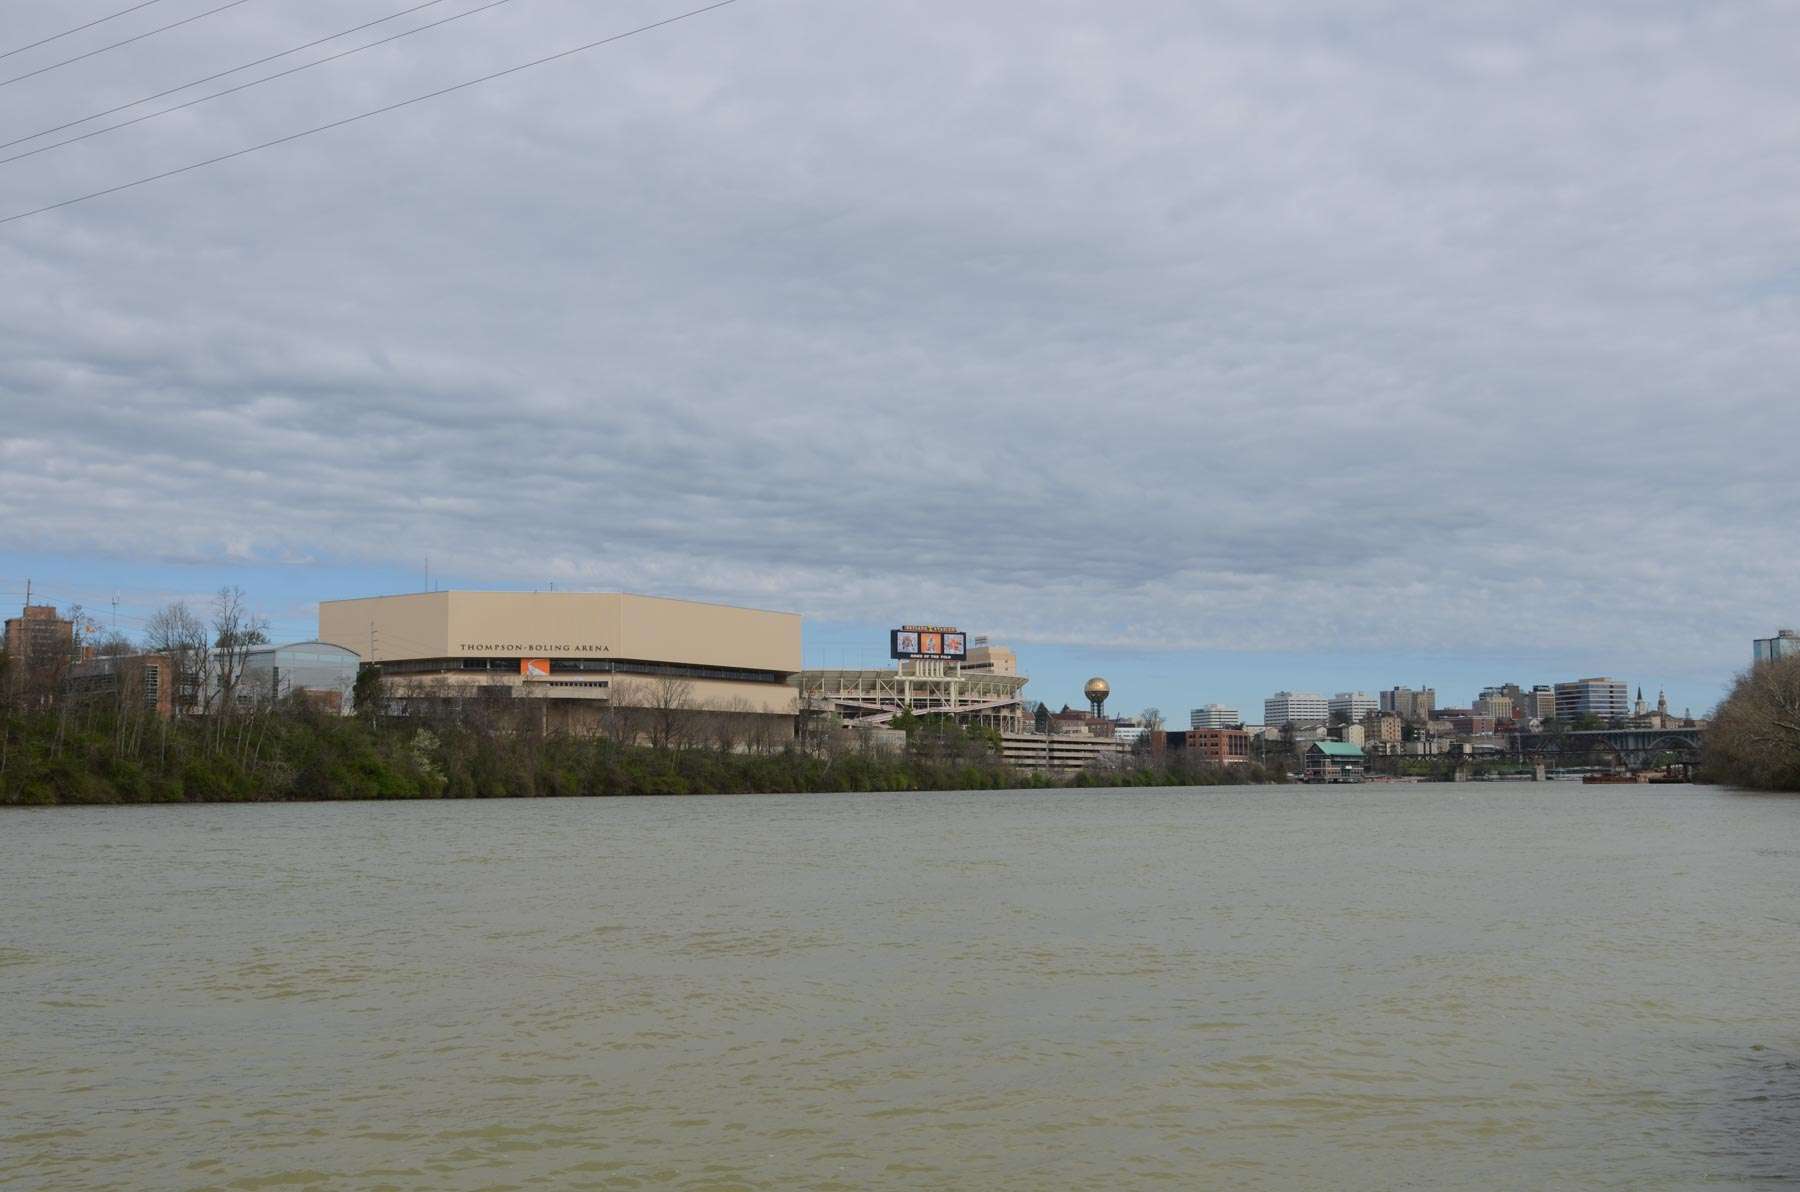 The University of Tennessee campus skyline is a compelling sight along the Tennessee River shoreline

